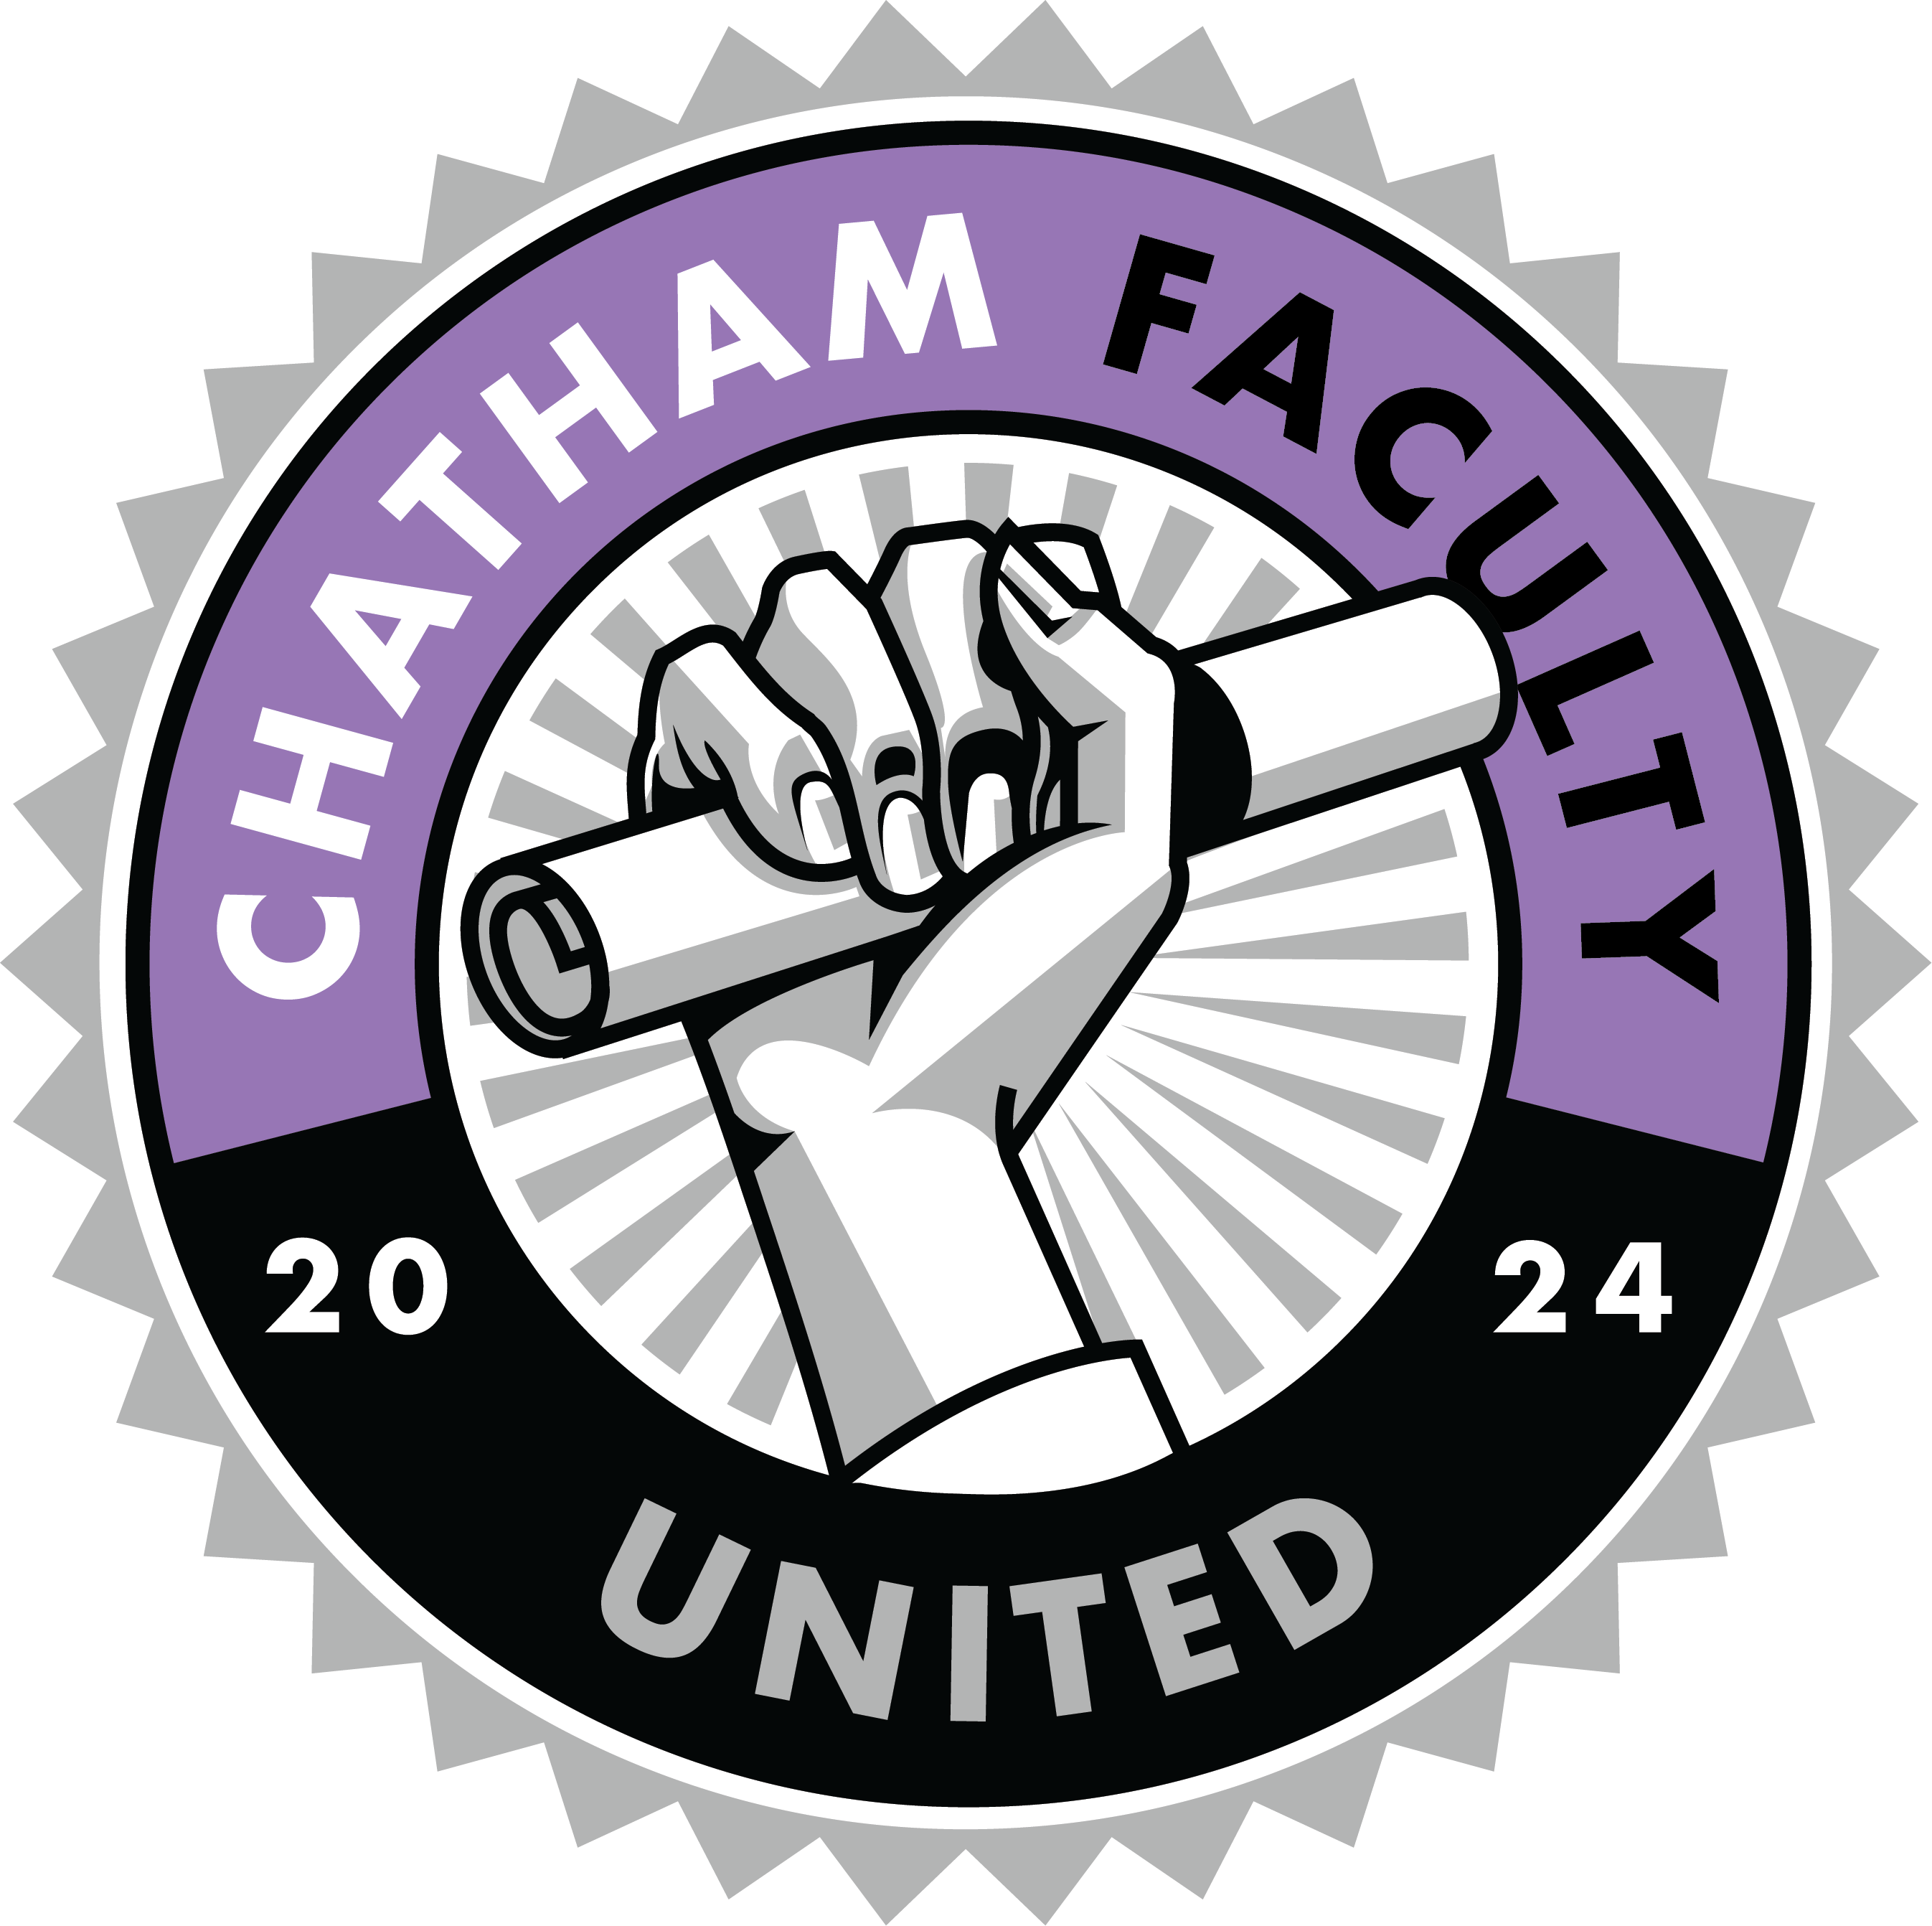 Chatham Faculty United